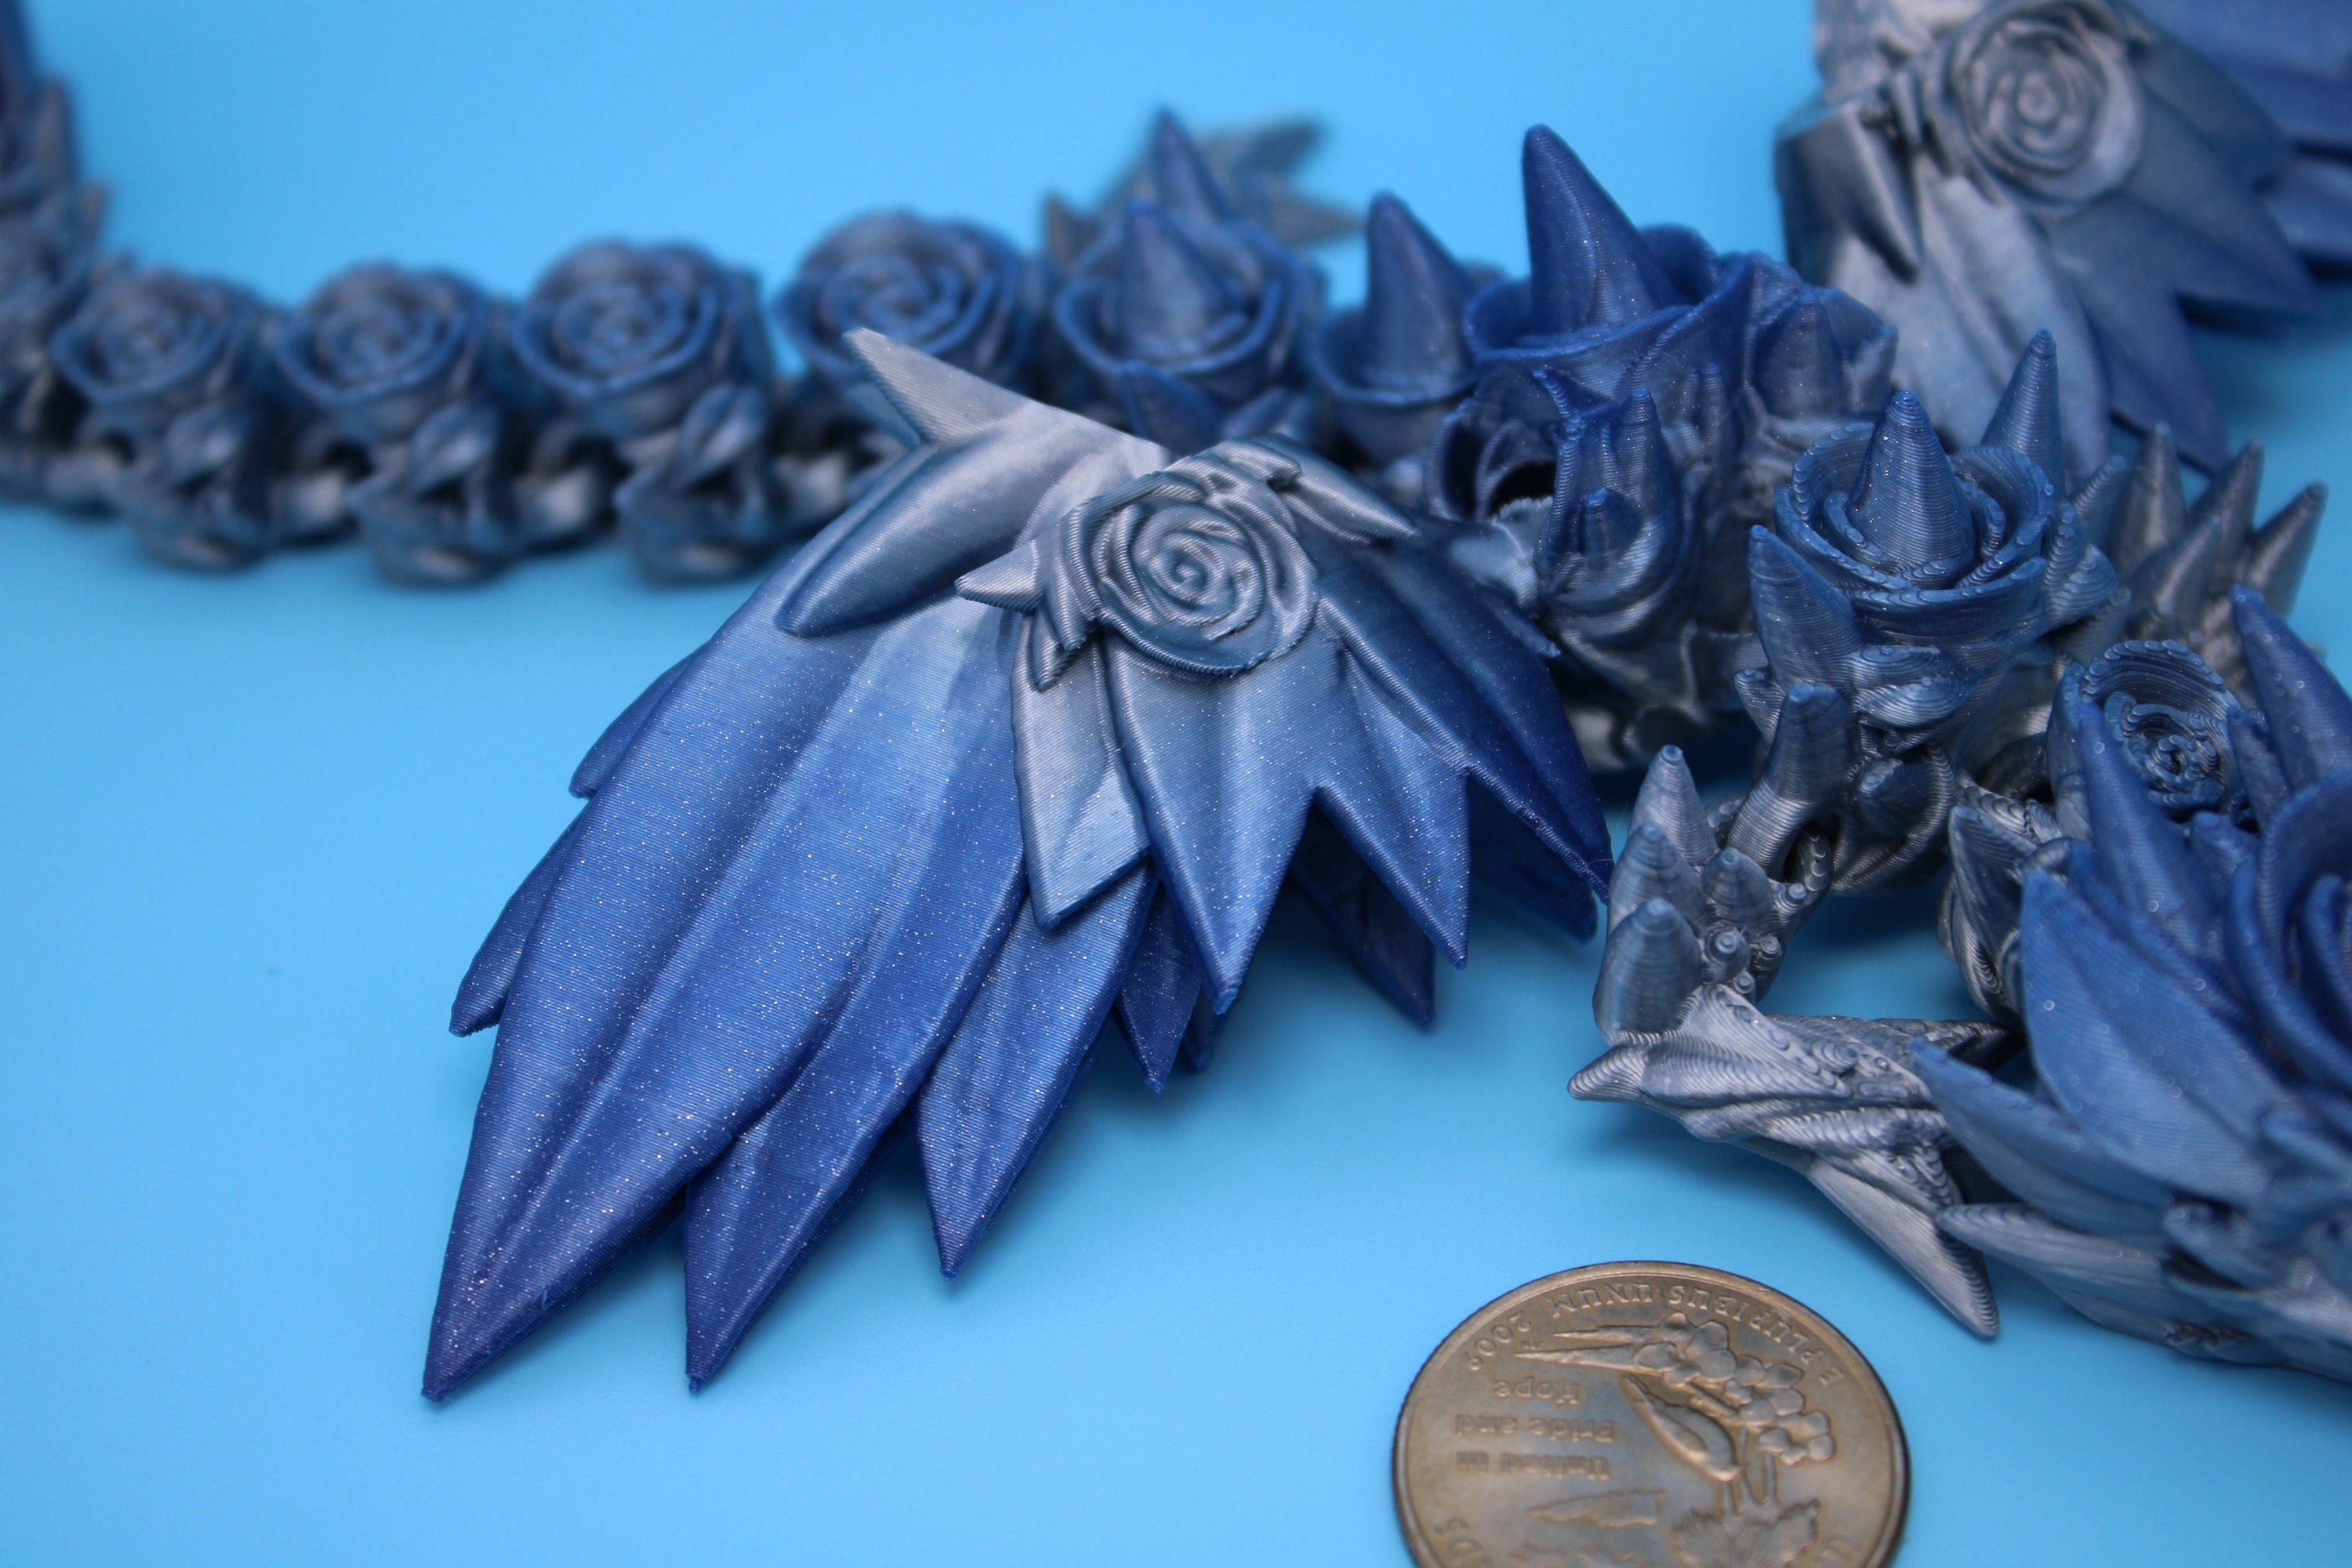 Miniature Baby Rose Wing Dragon | Blue / Silver | 3D printed articulating Toy Fidget | Flexi Toy 8.5 in. head to tail | Stress Relief Gift